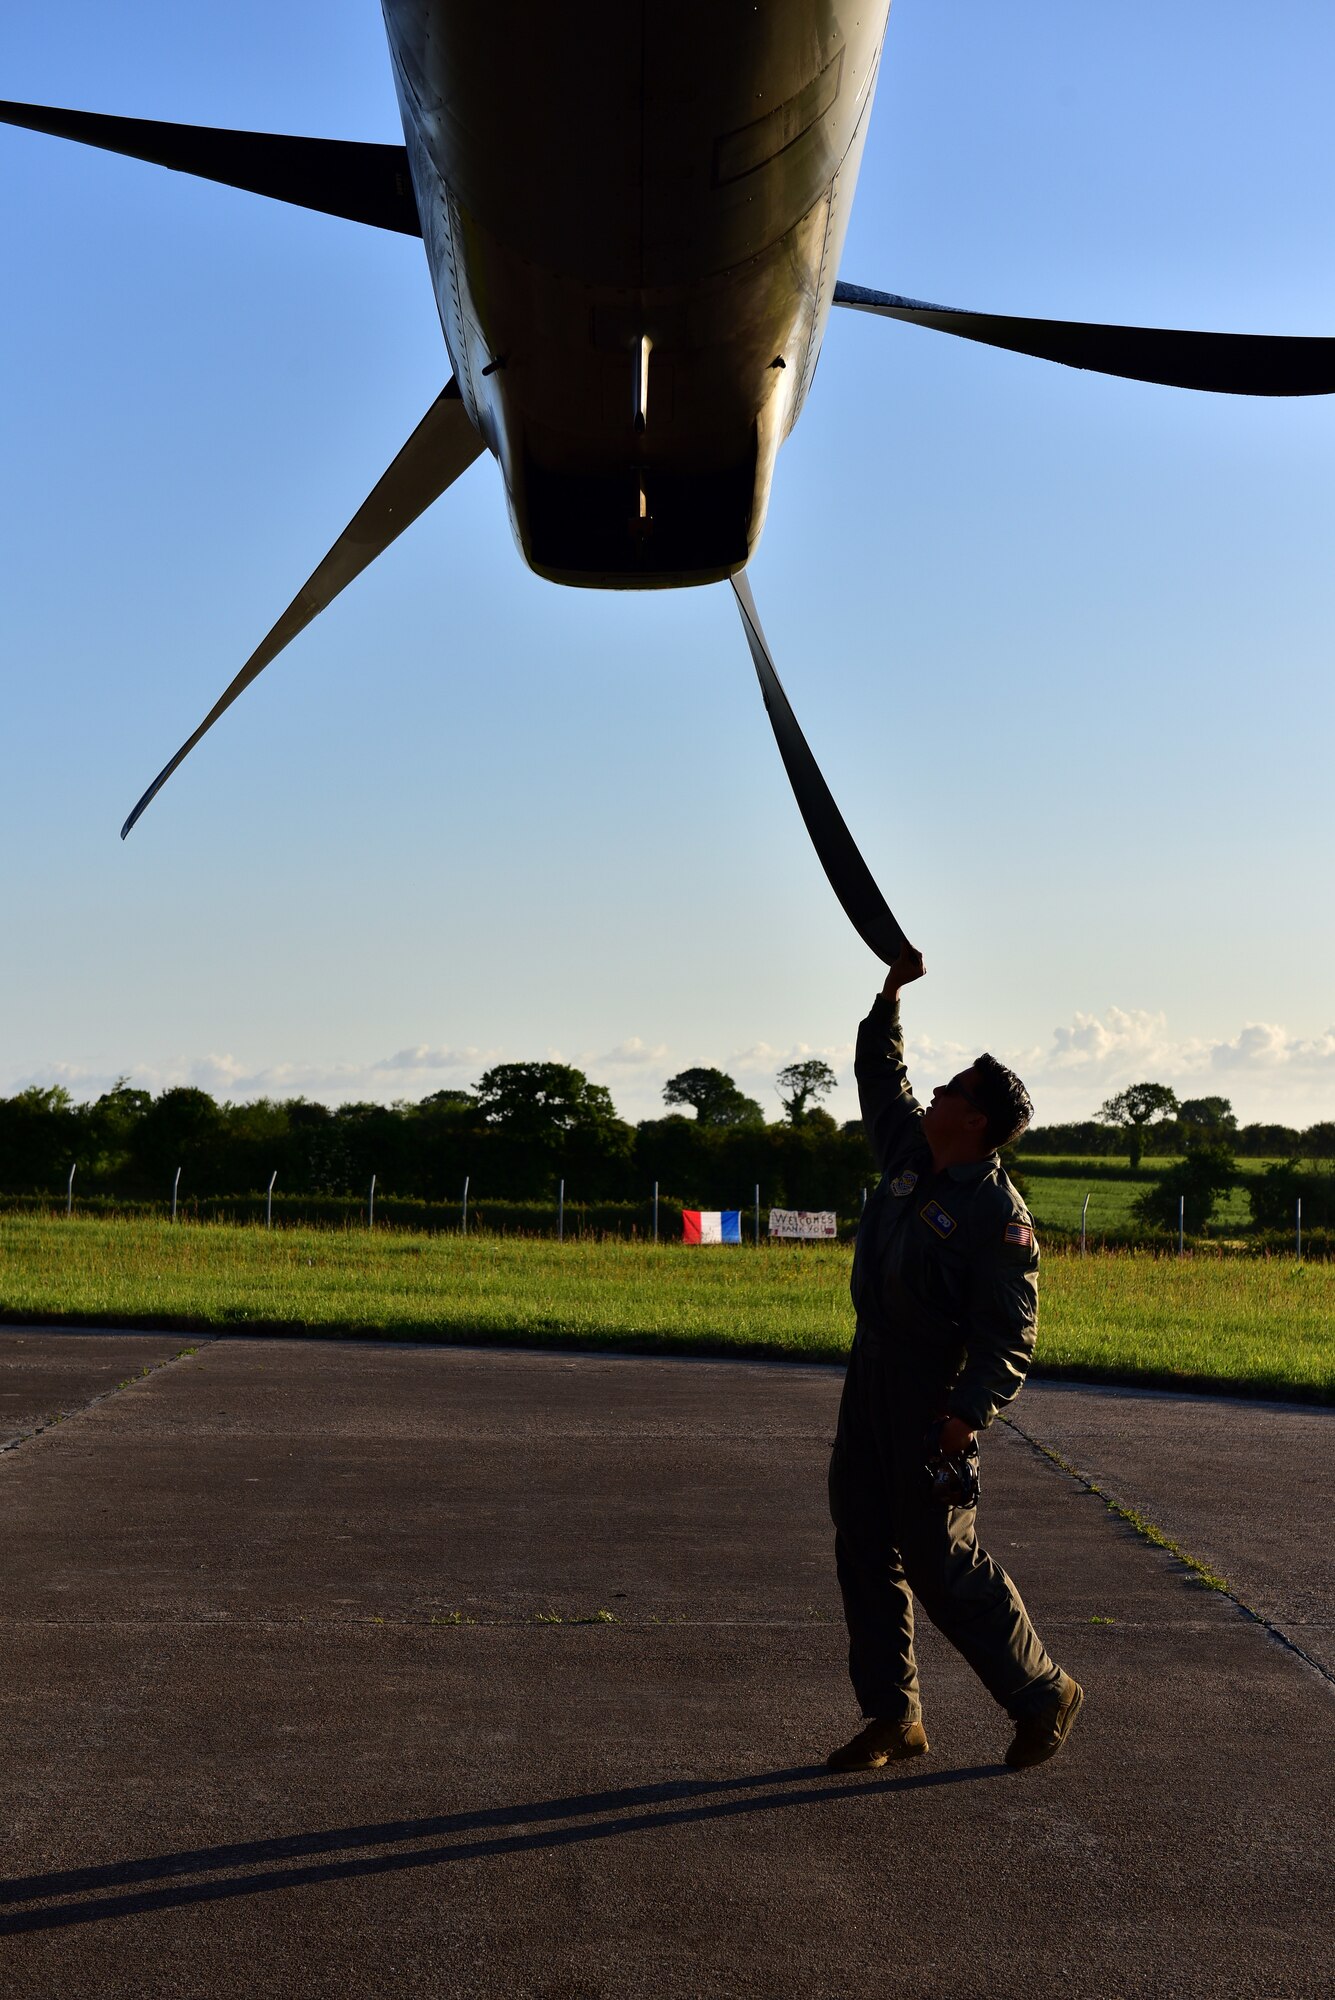 An Airman inspects the prop of a C-130J